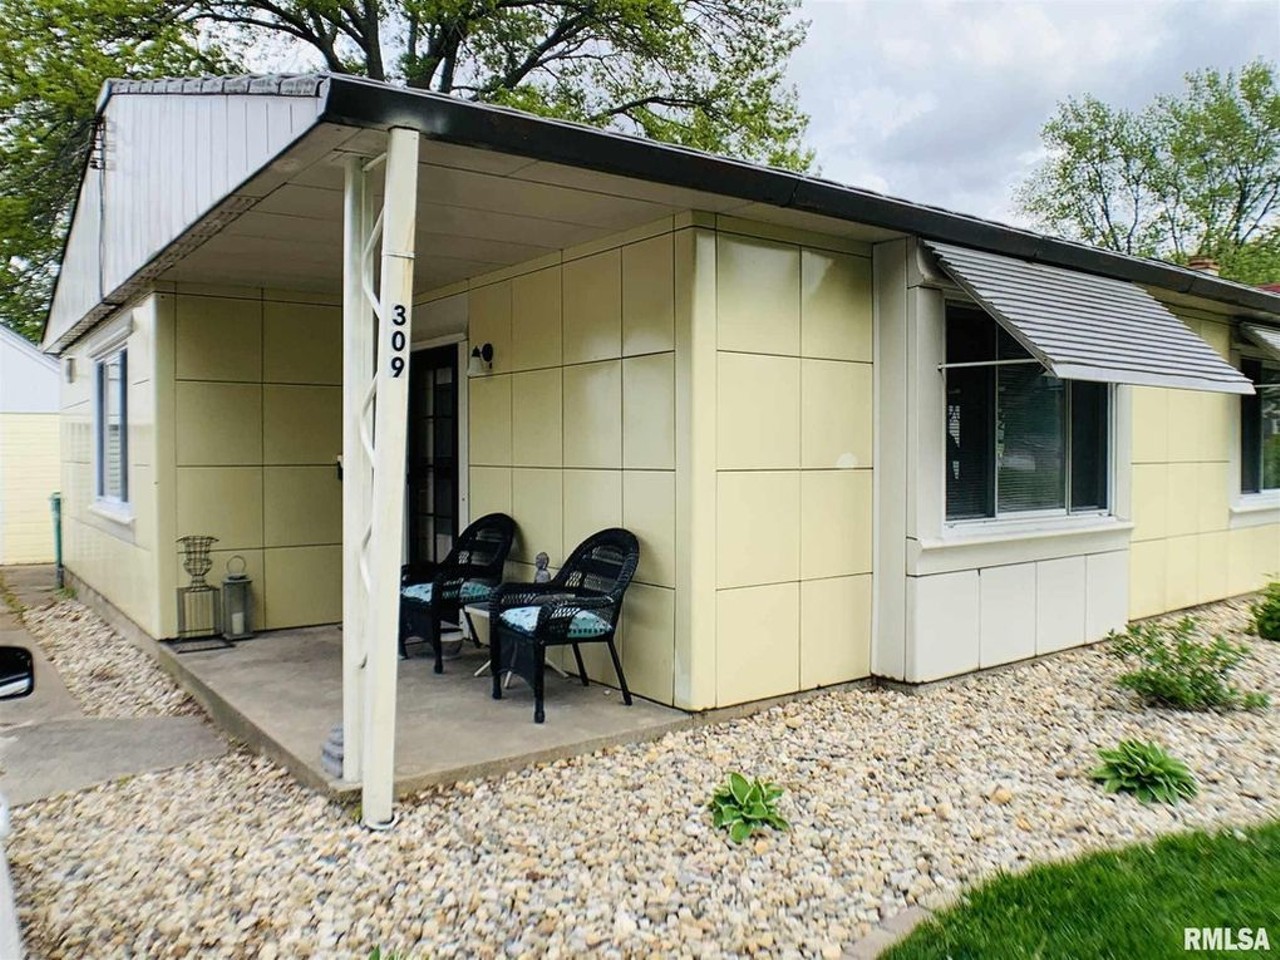 Rare Lustron Steel House For Sale in Illinois [PHOTOS]